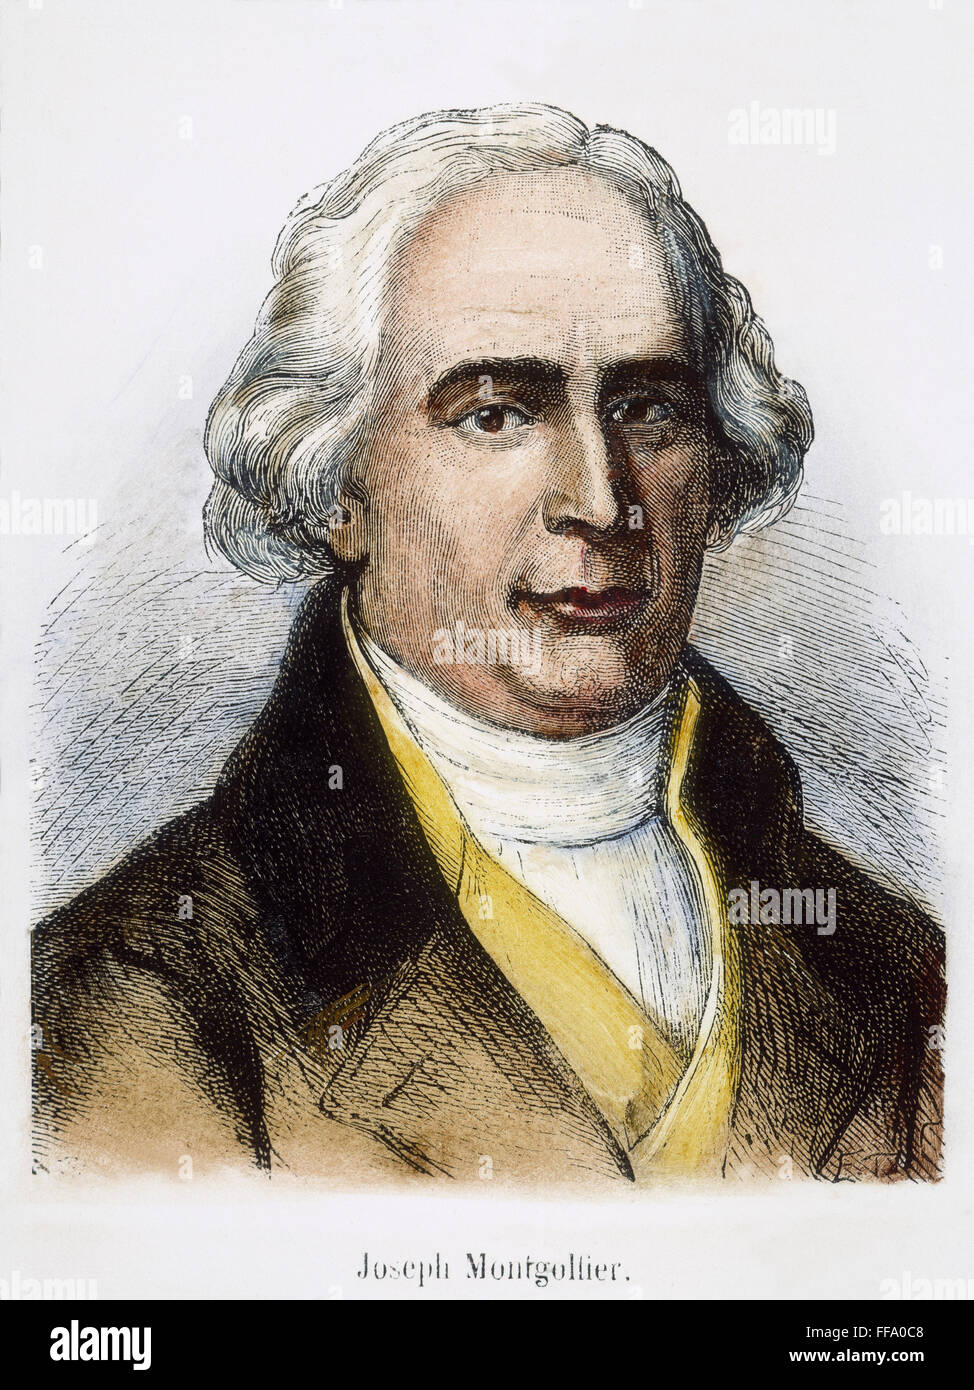 JOSEPH-MICHEL MONTGOLFIER /n(1740-1810). French inventor: line engraving, 19th century. Stock Photo